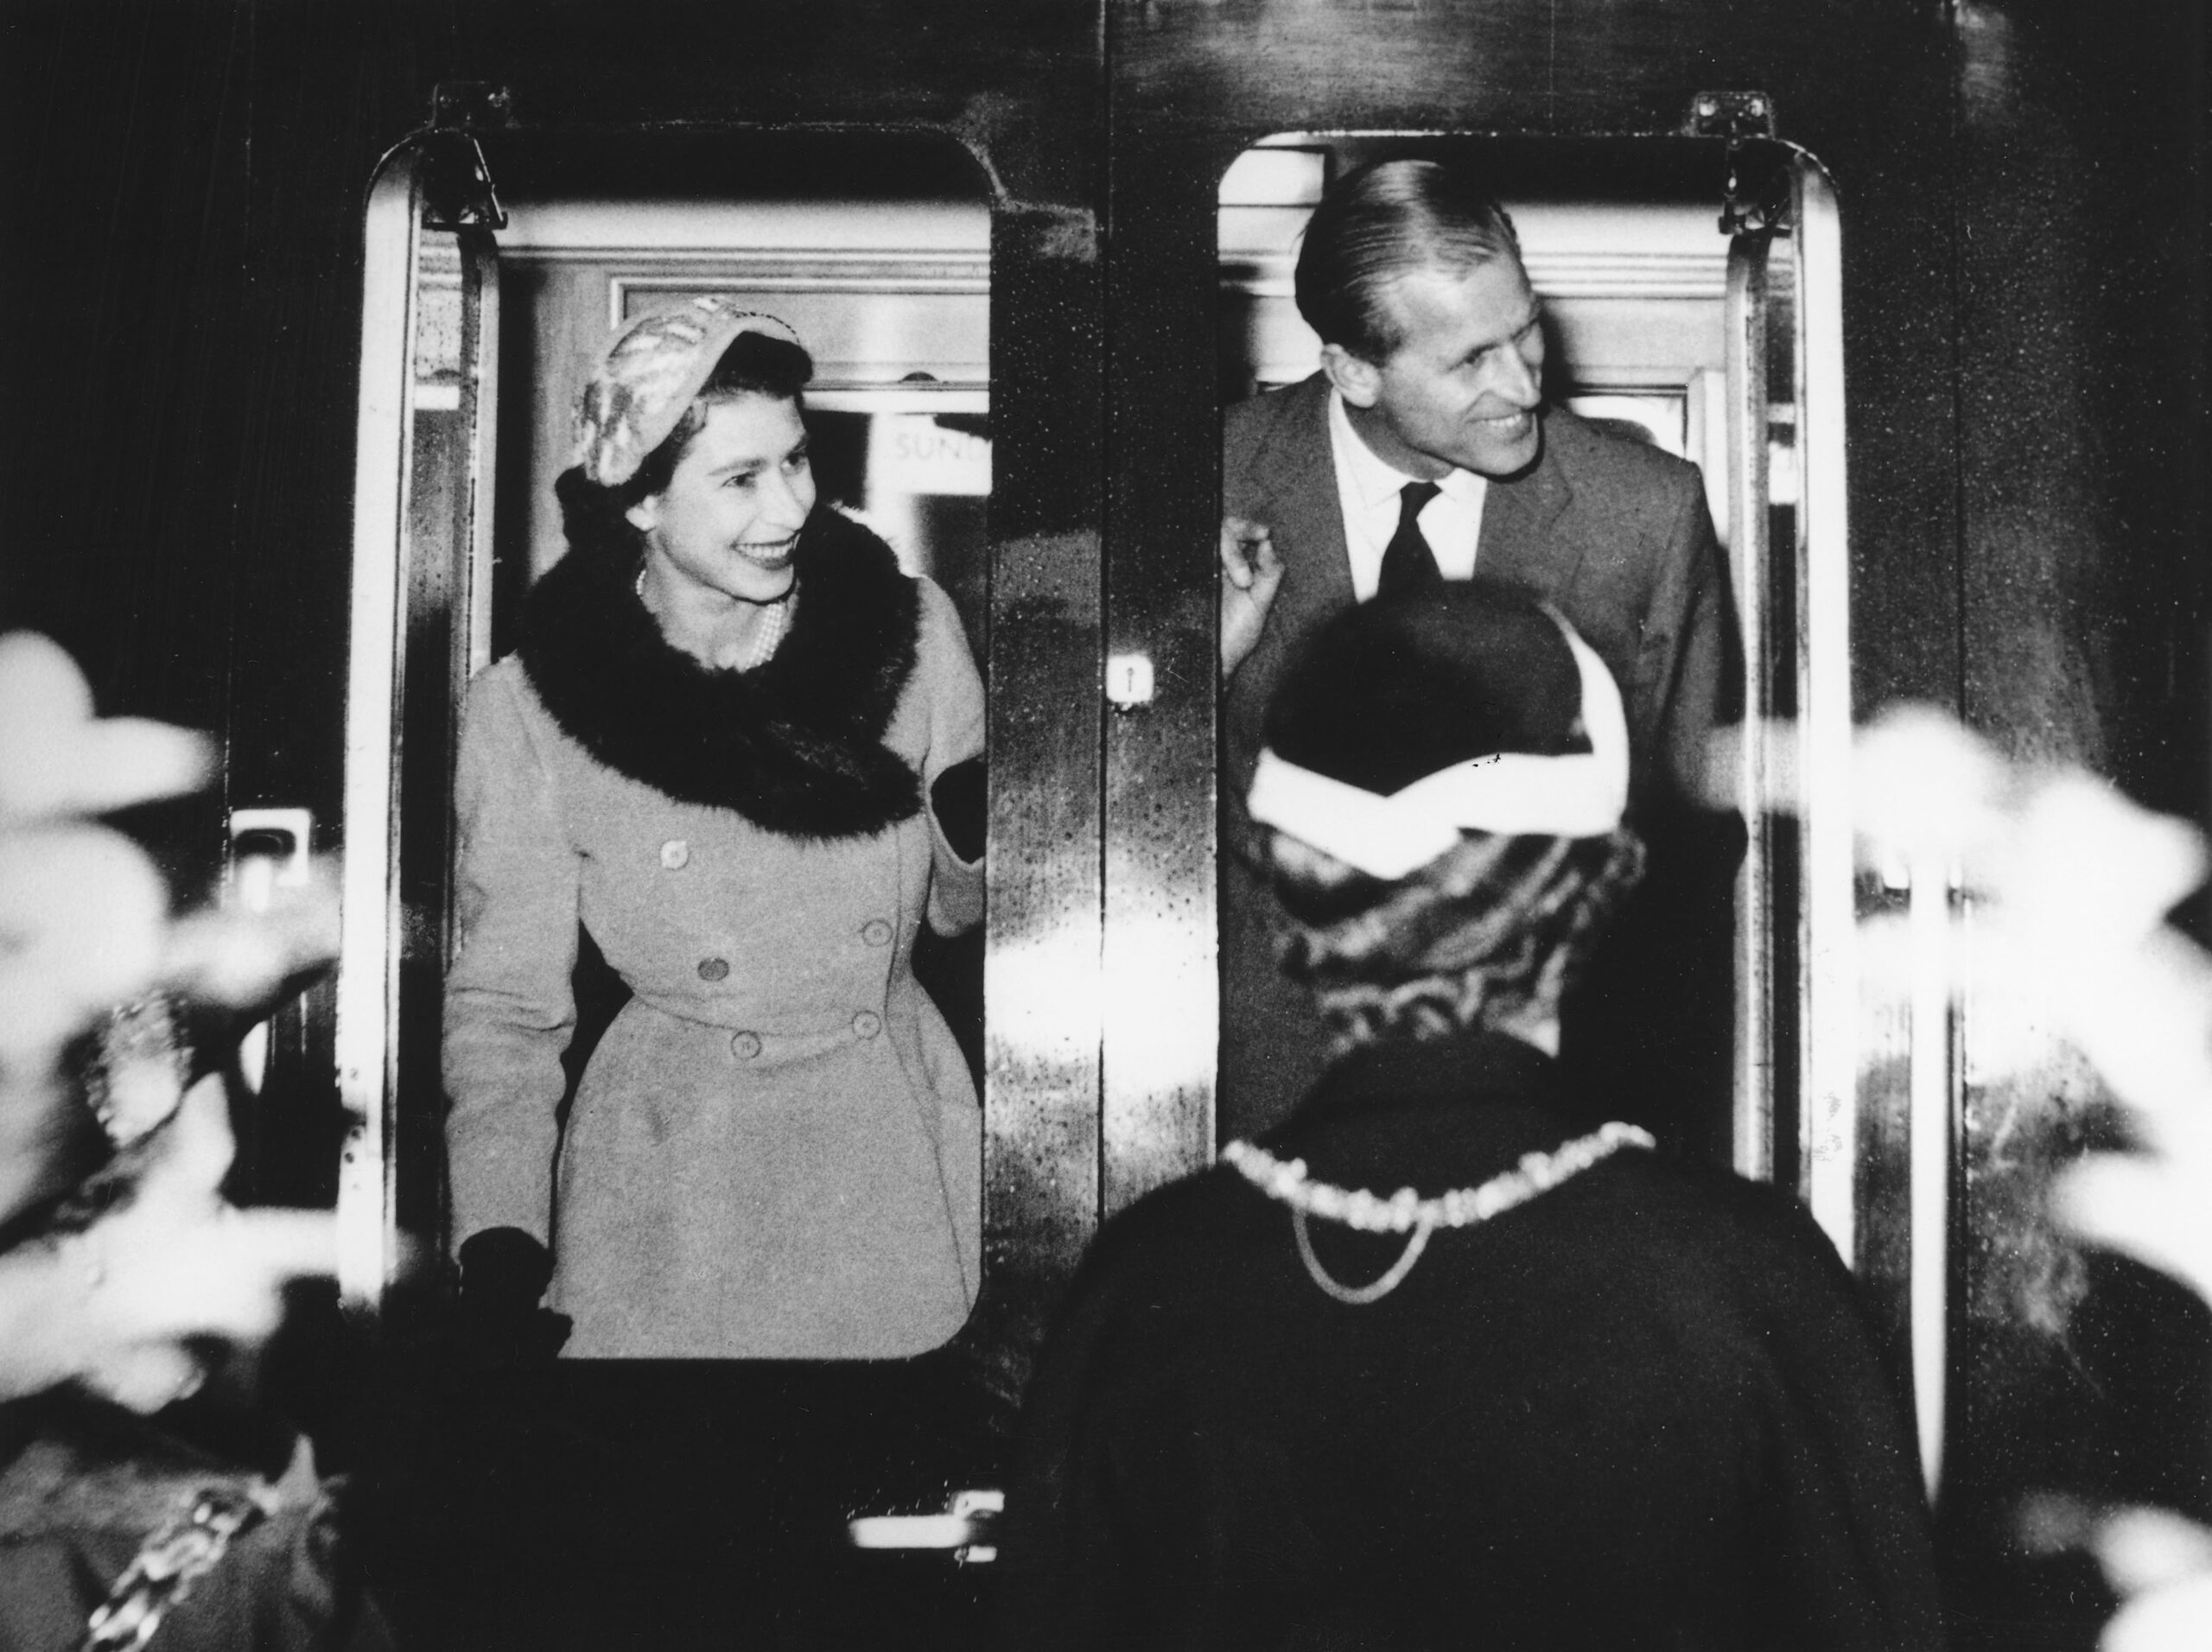 Her Majesty the Queen and His Royal Highness The Duke of Edinburgh on disembarking from their Royal Carriage. 